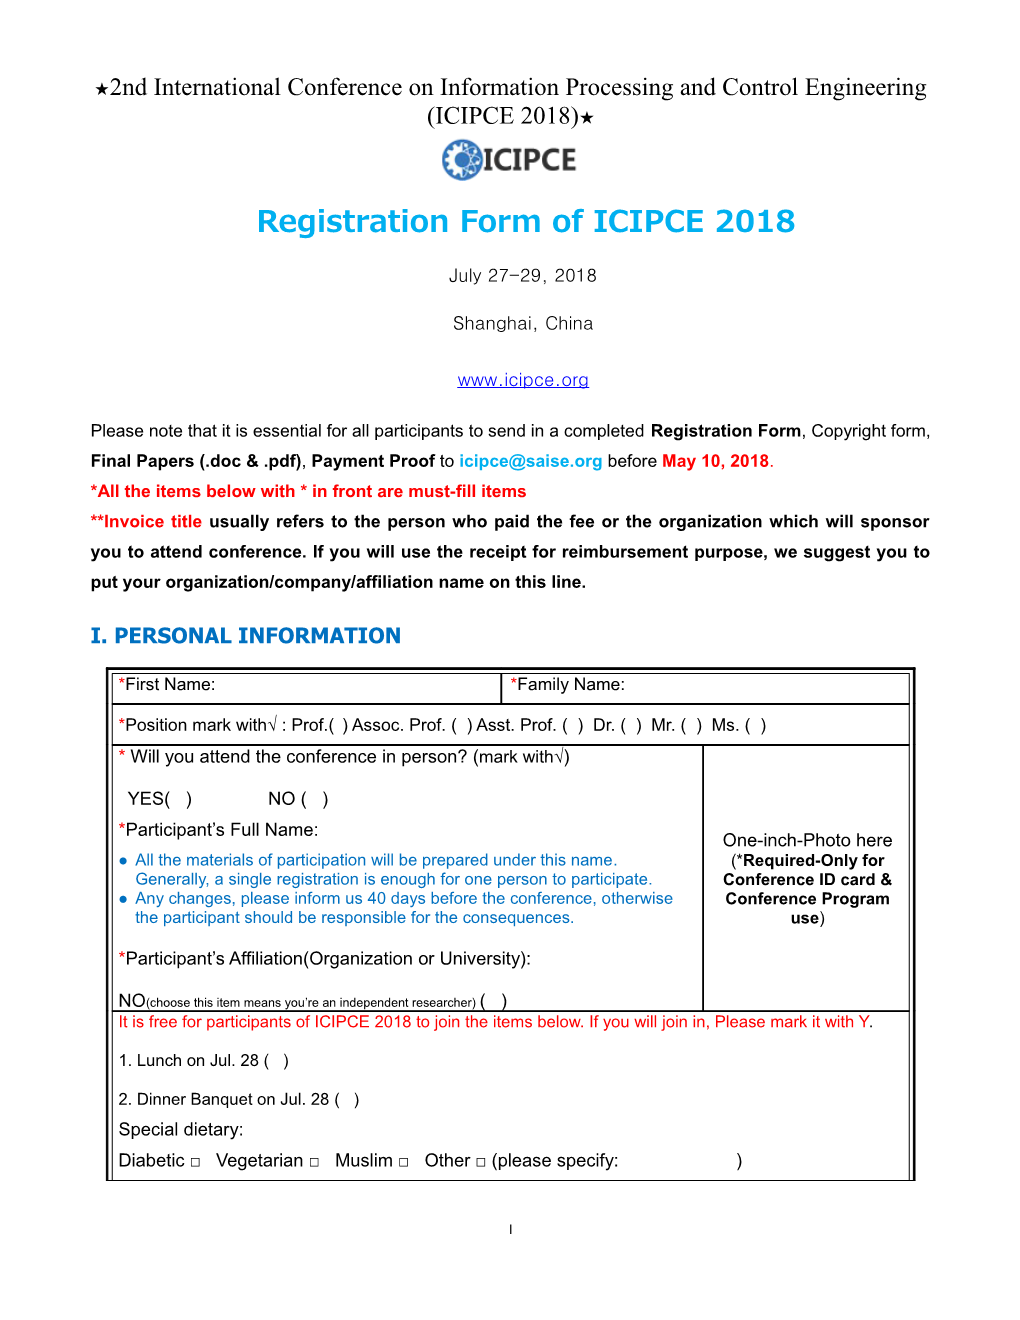 2Nd International Conference on Information Processing and Control Engineering (ICIPCE 2018)